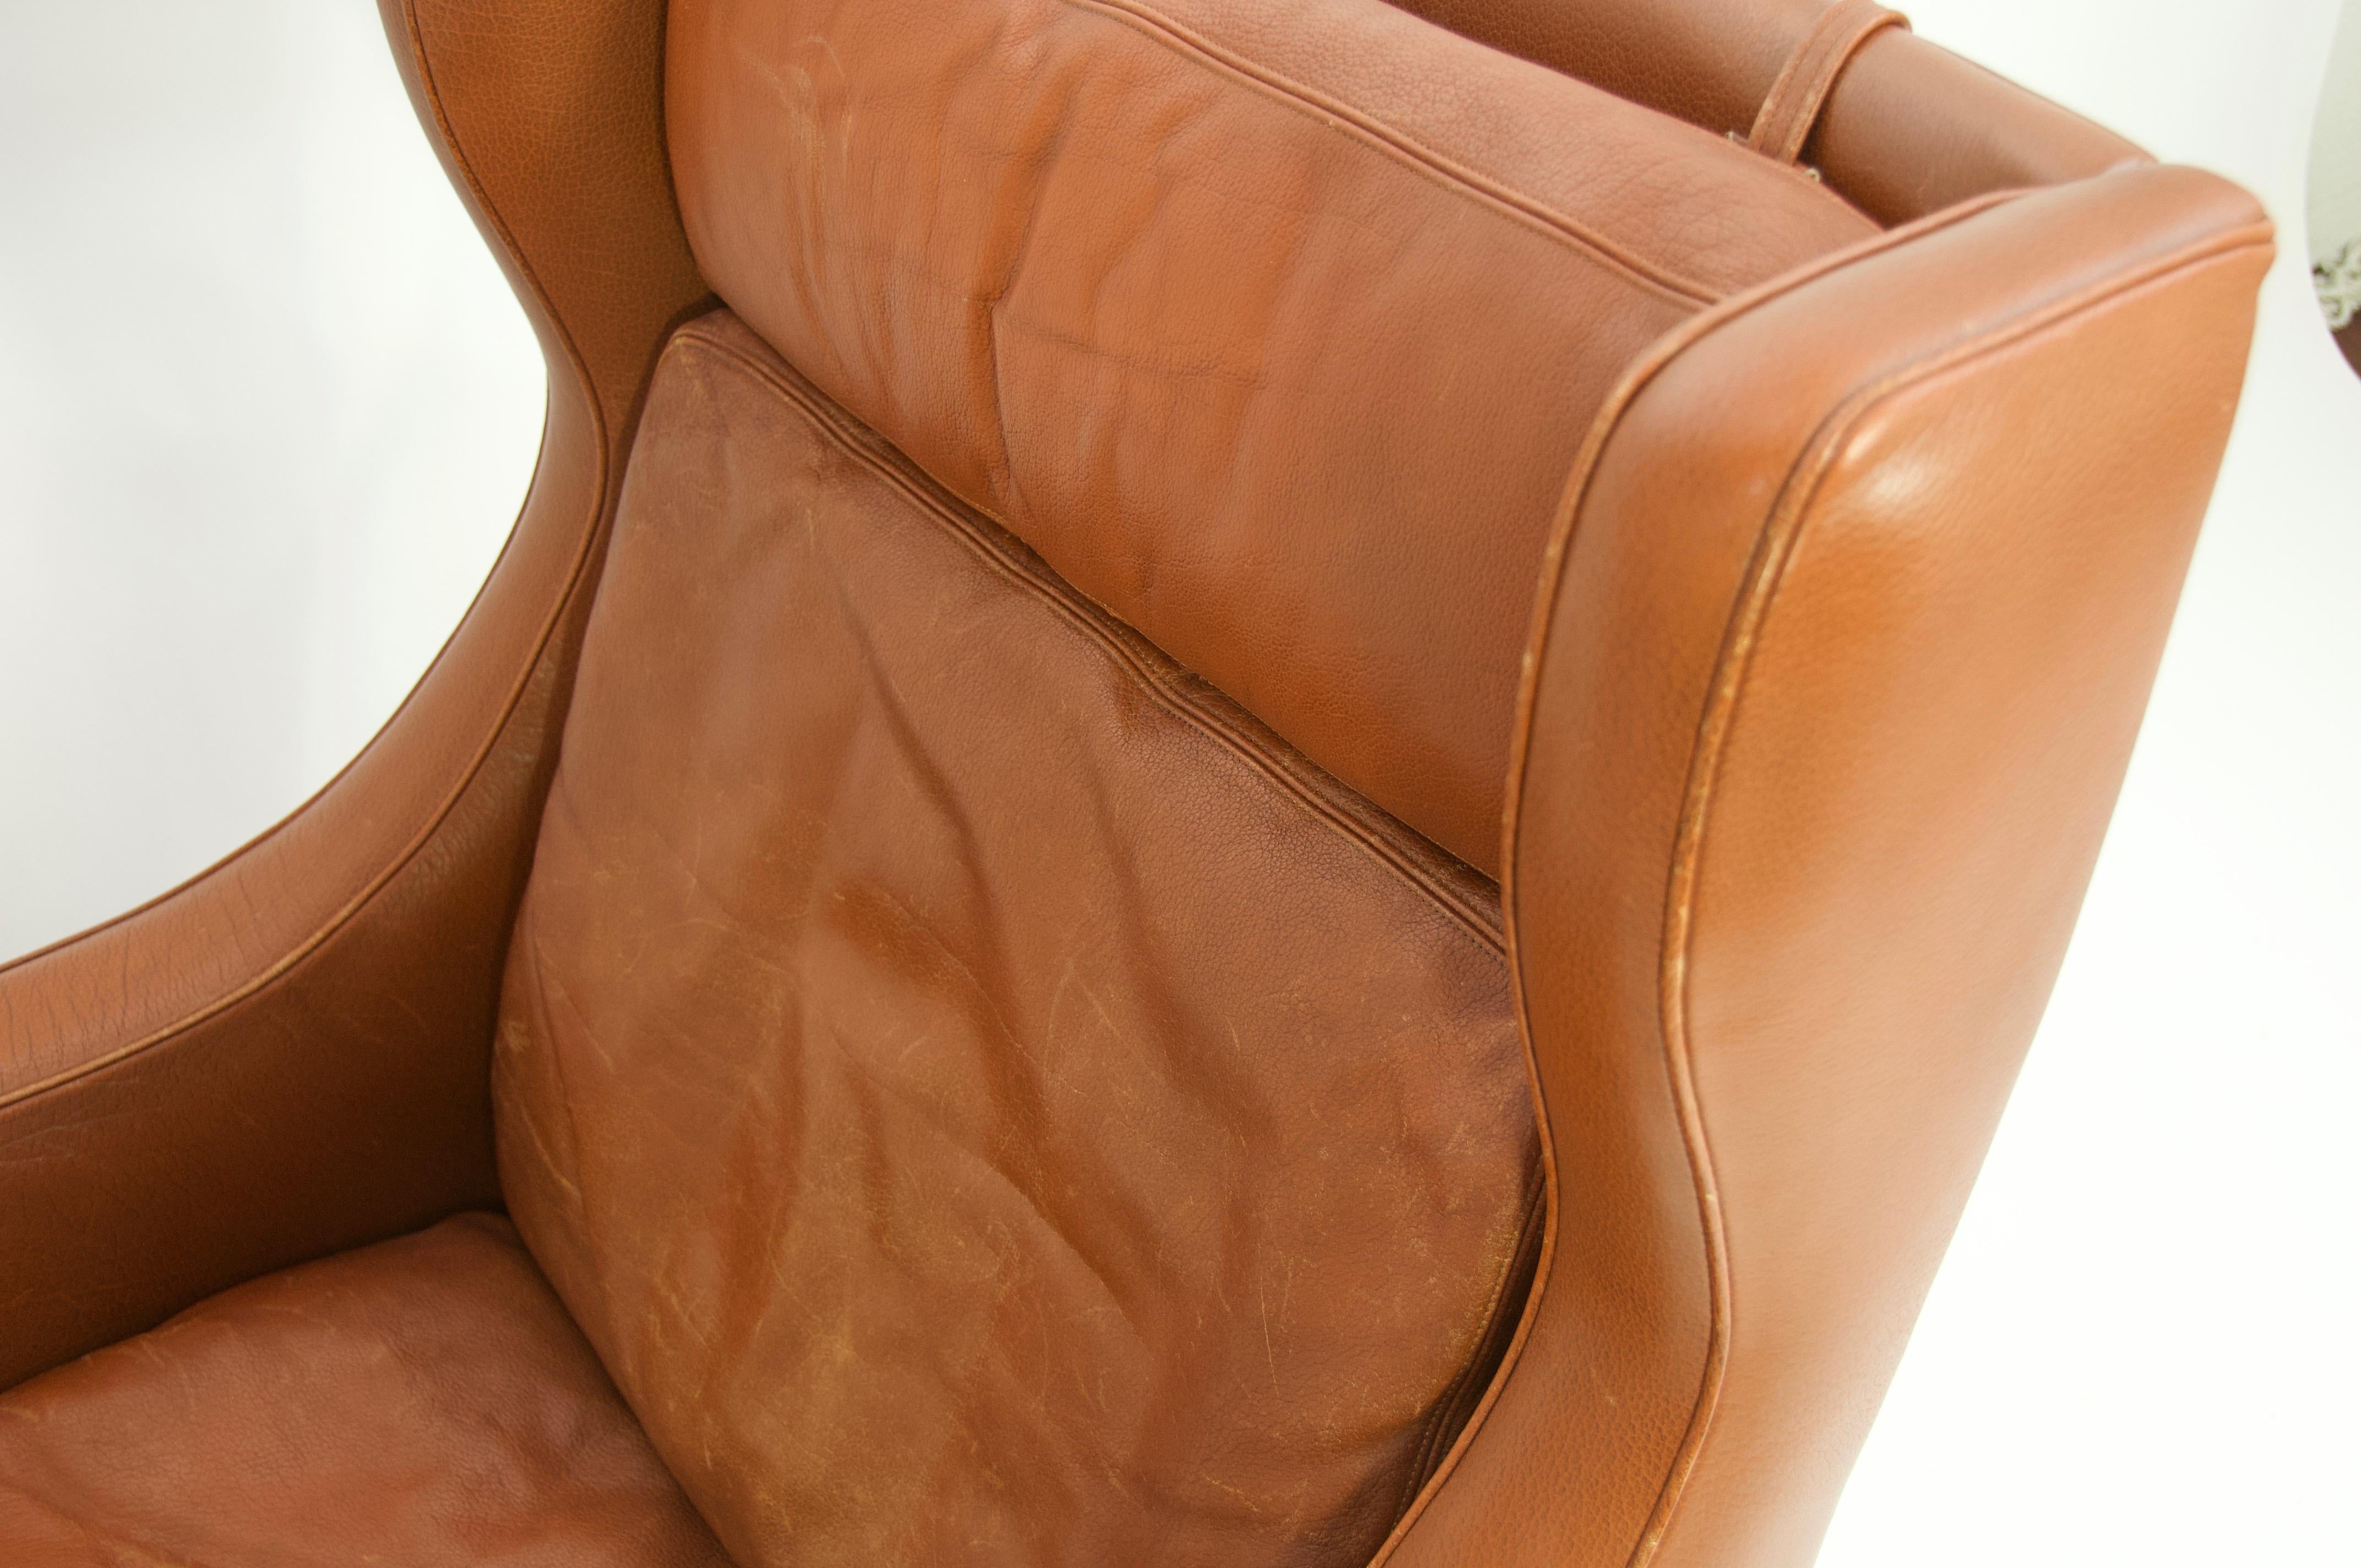 high back leather chairs